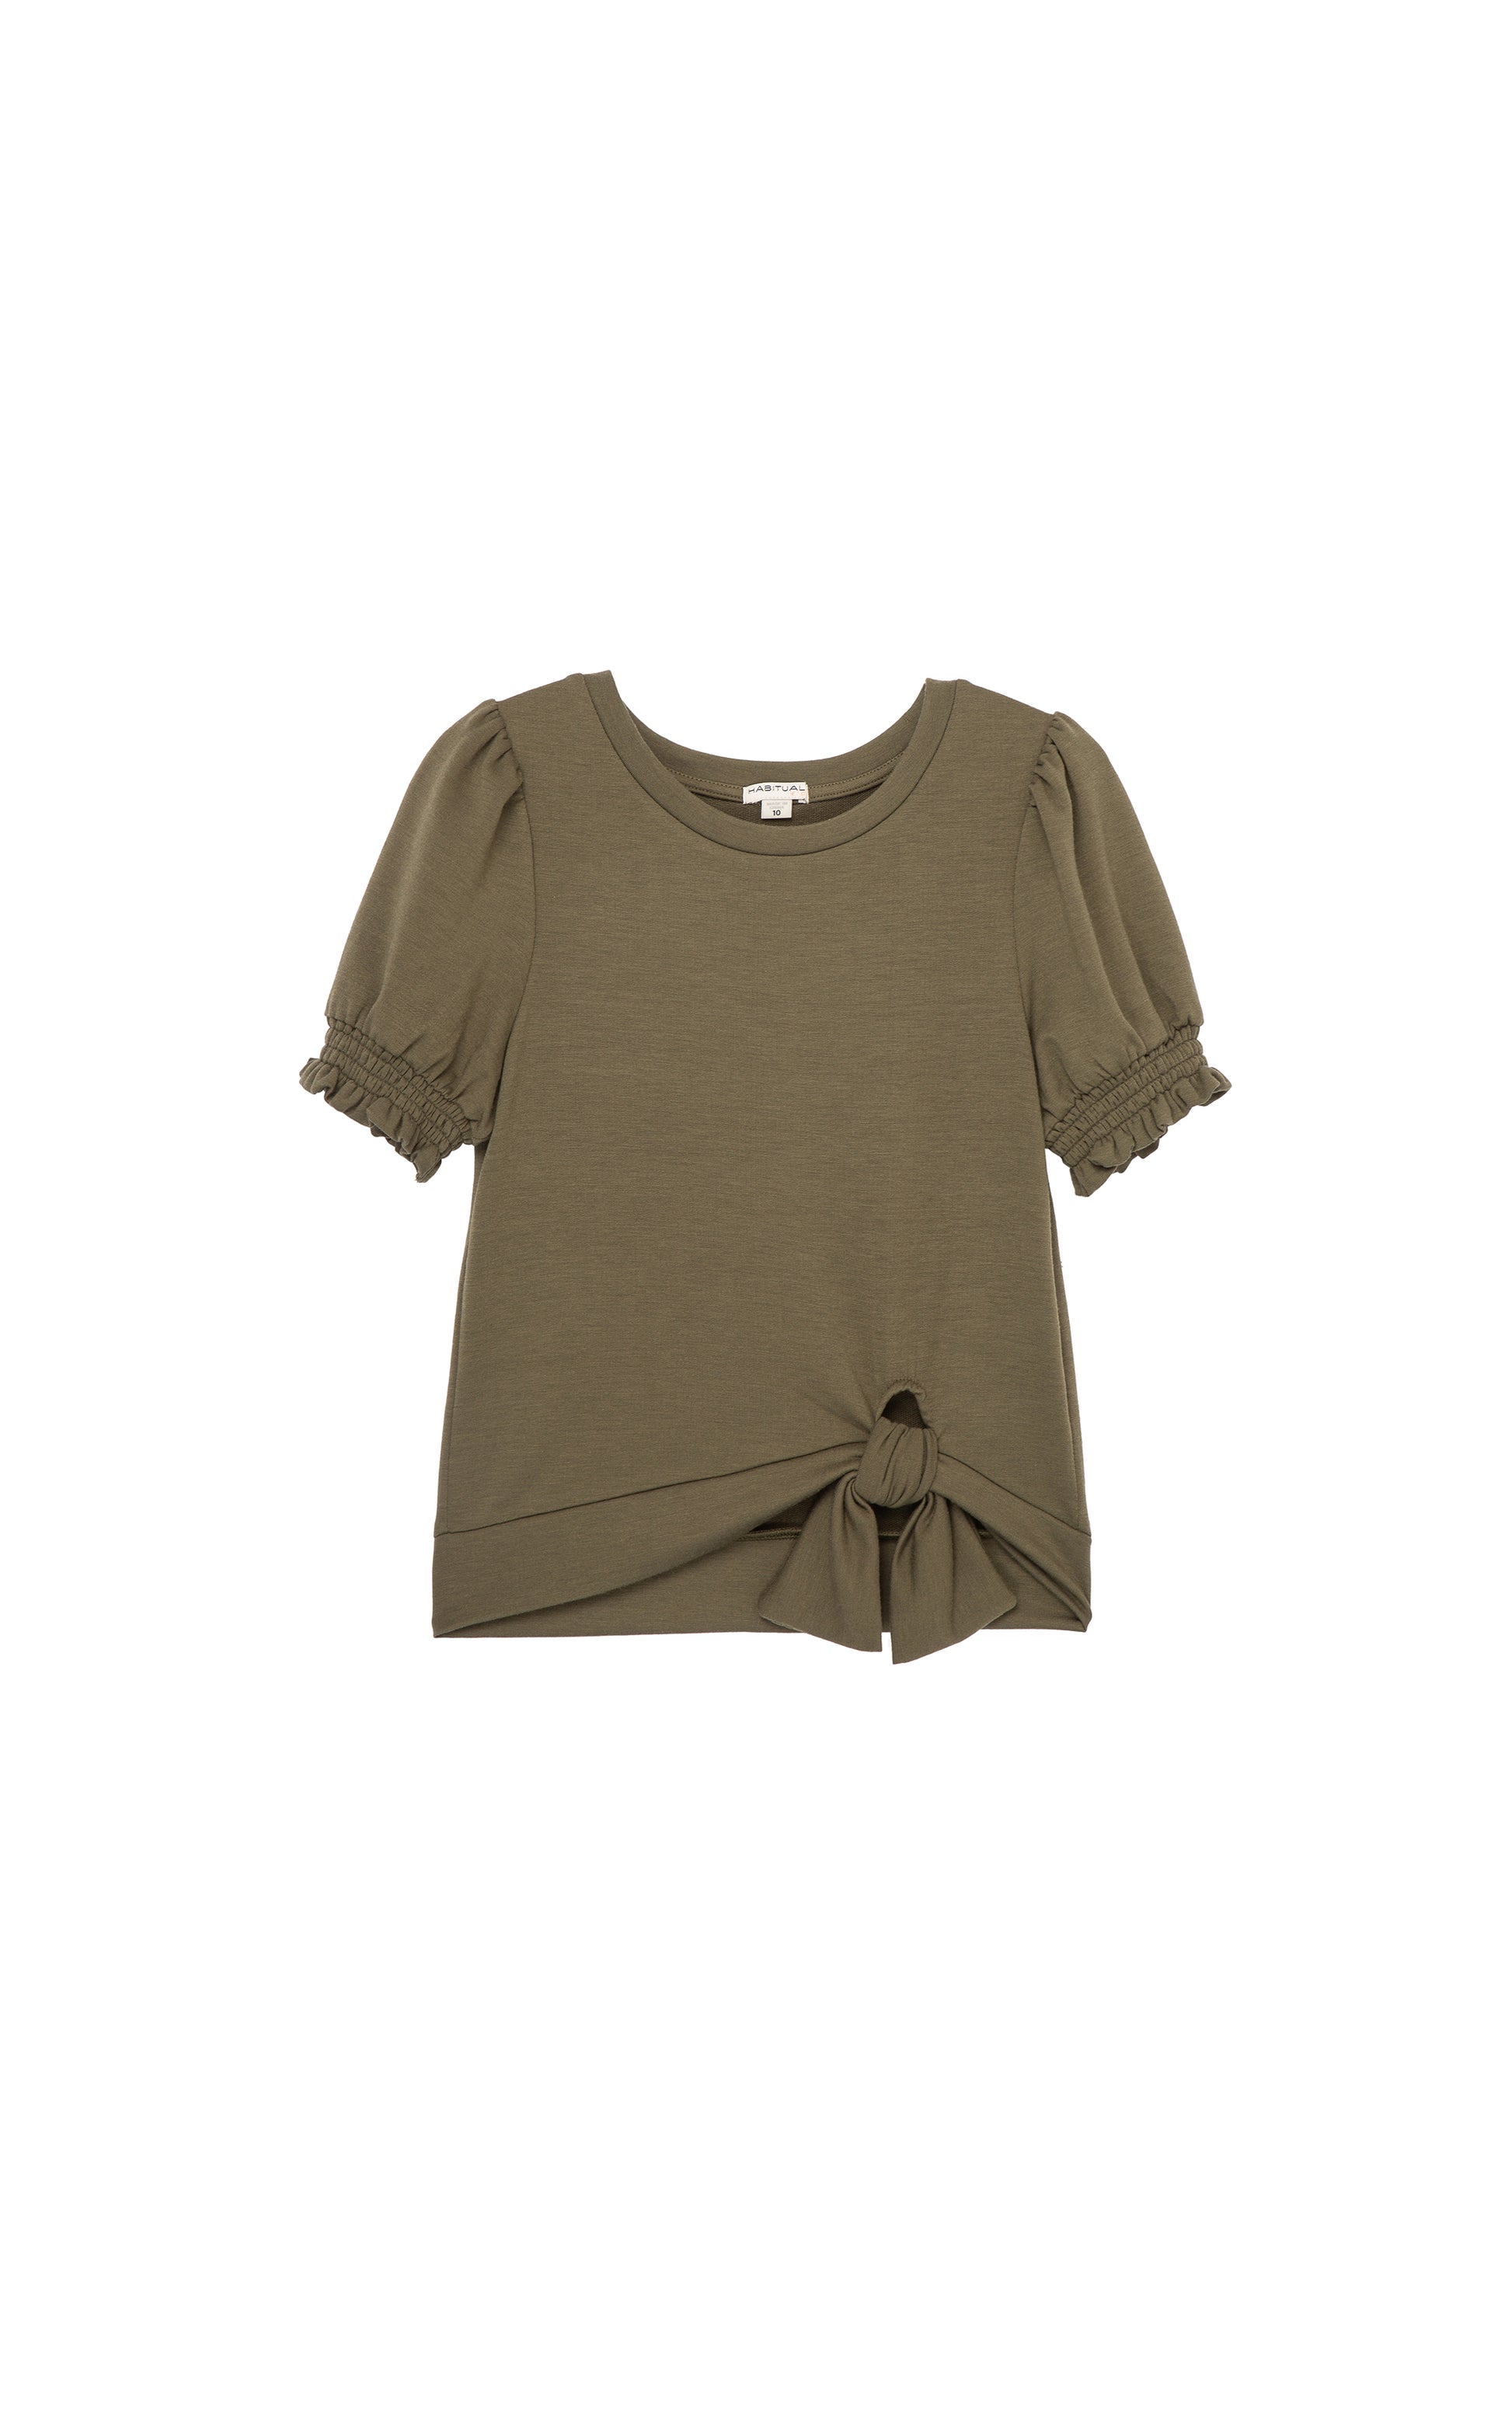 BROWN SHORT SLEEVE KNIT TOP WITH PUFFY AND SMOCKED SLEEVES AND A SIDE TIE WITH A BOW